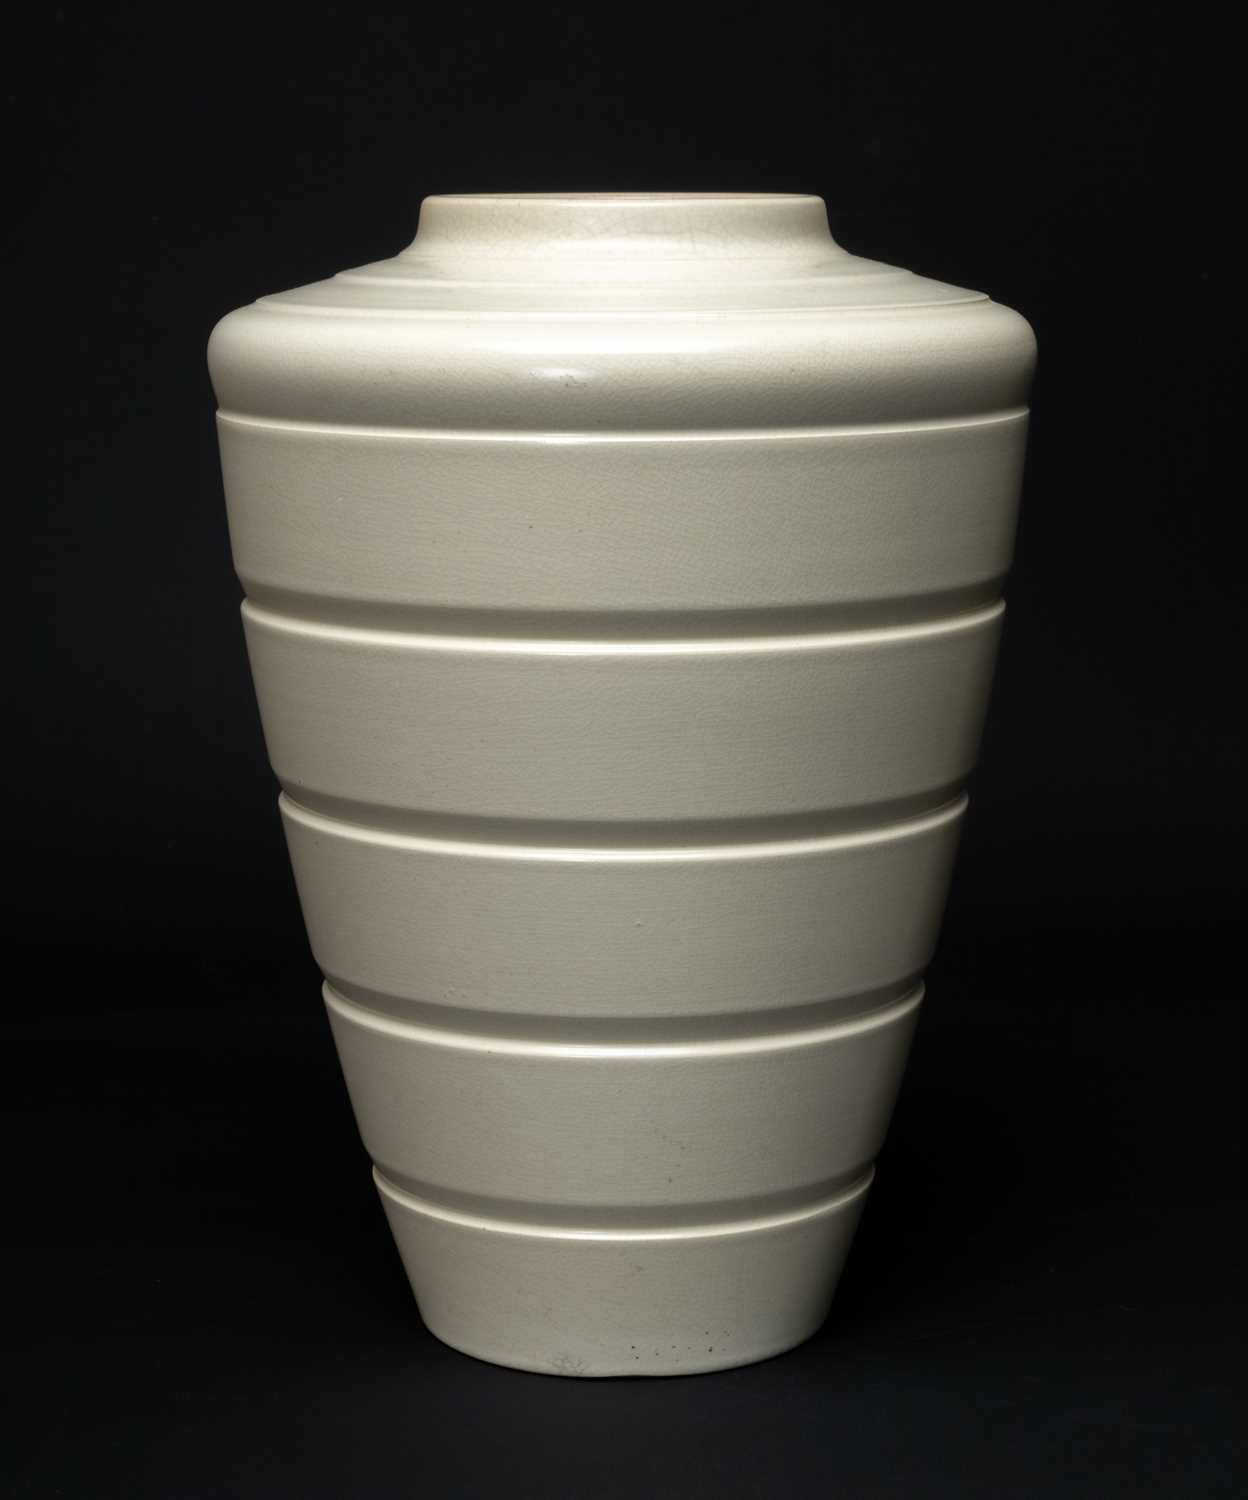 KEITH MURRAY FOR WEDGWOOD: tapering circular moonstone glazed white vase, black backstamps, 28cms (